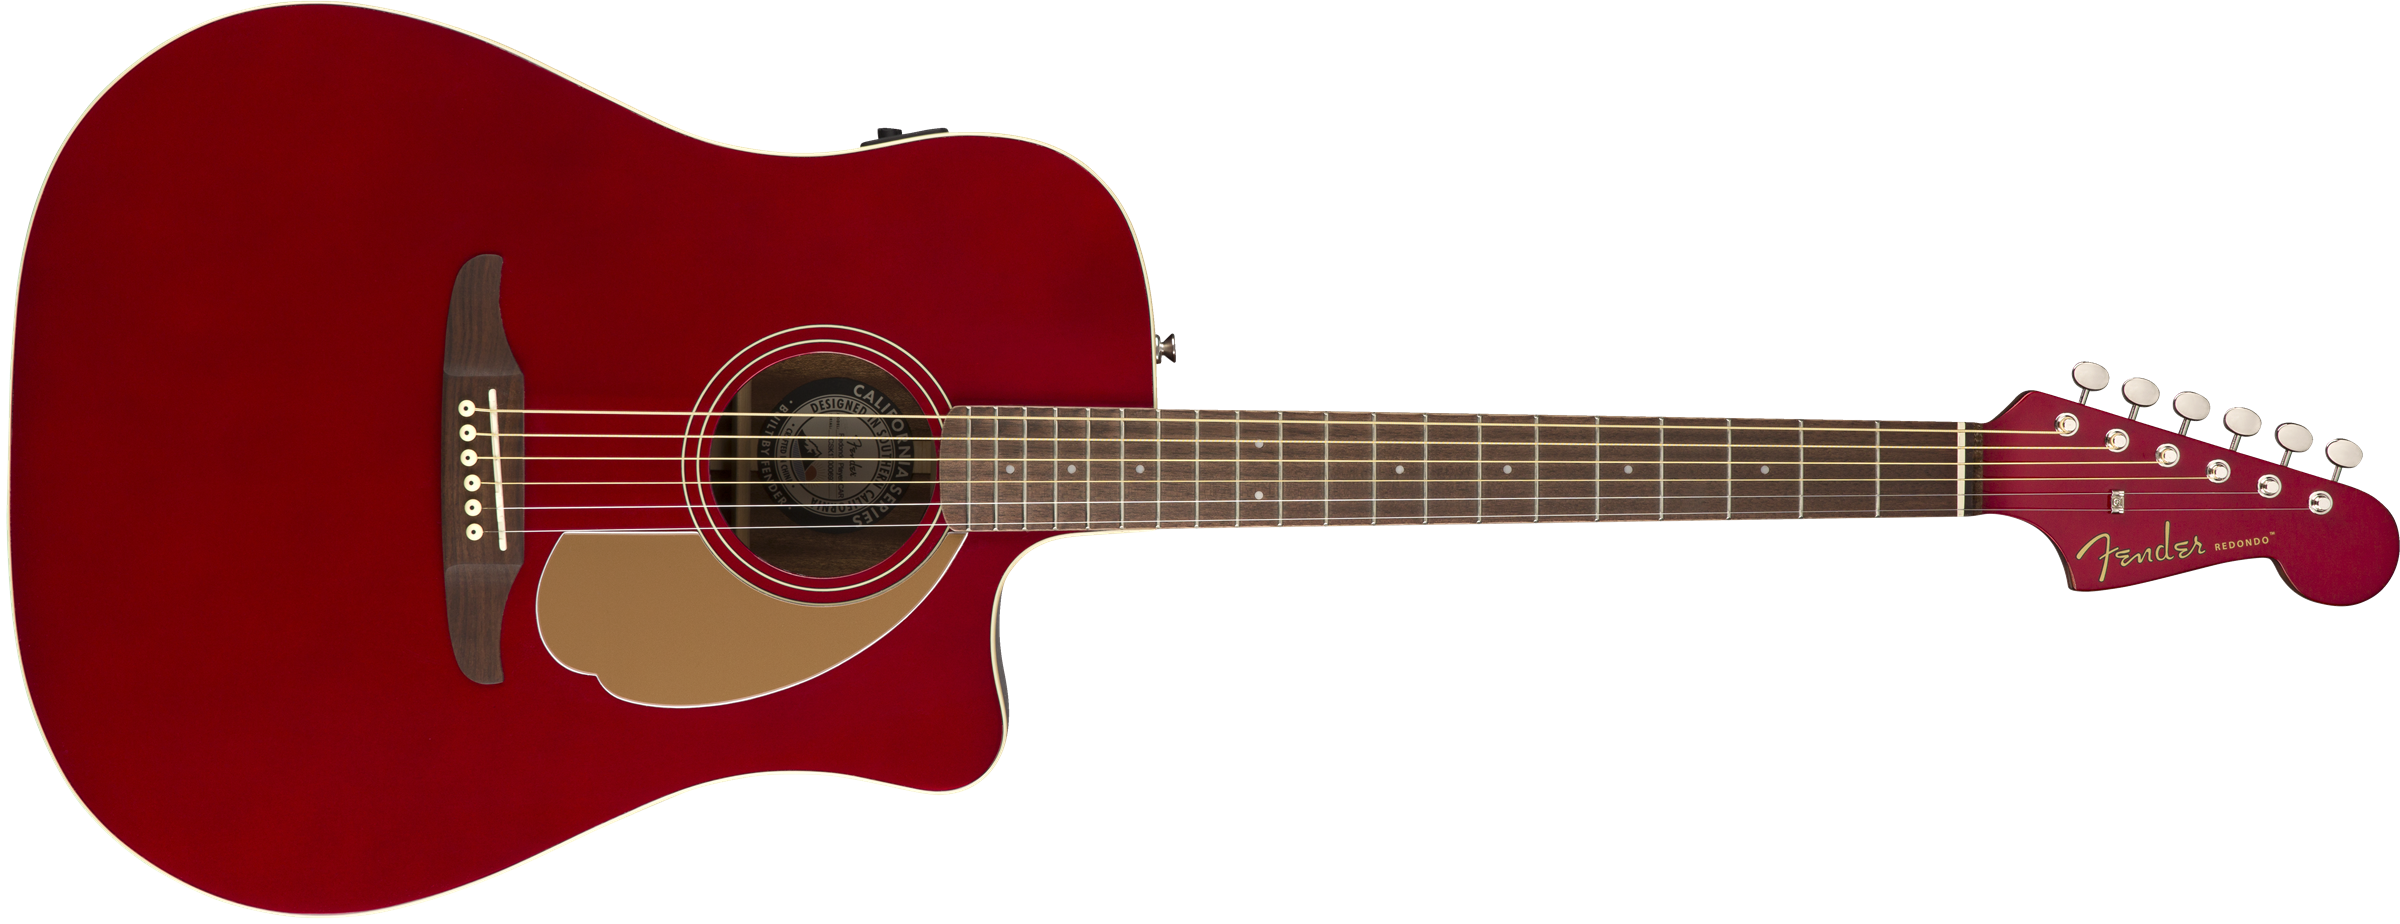 Fender Redondo Player - Candy Apple Red - Guitare Acoustique - Variation 1